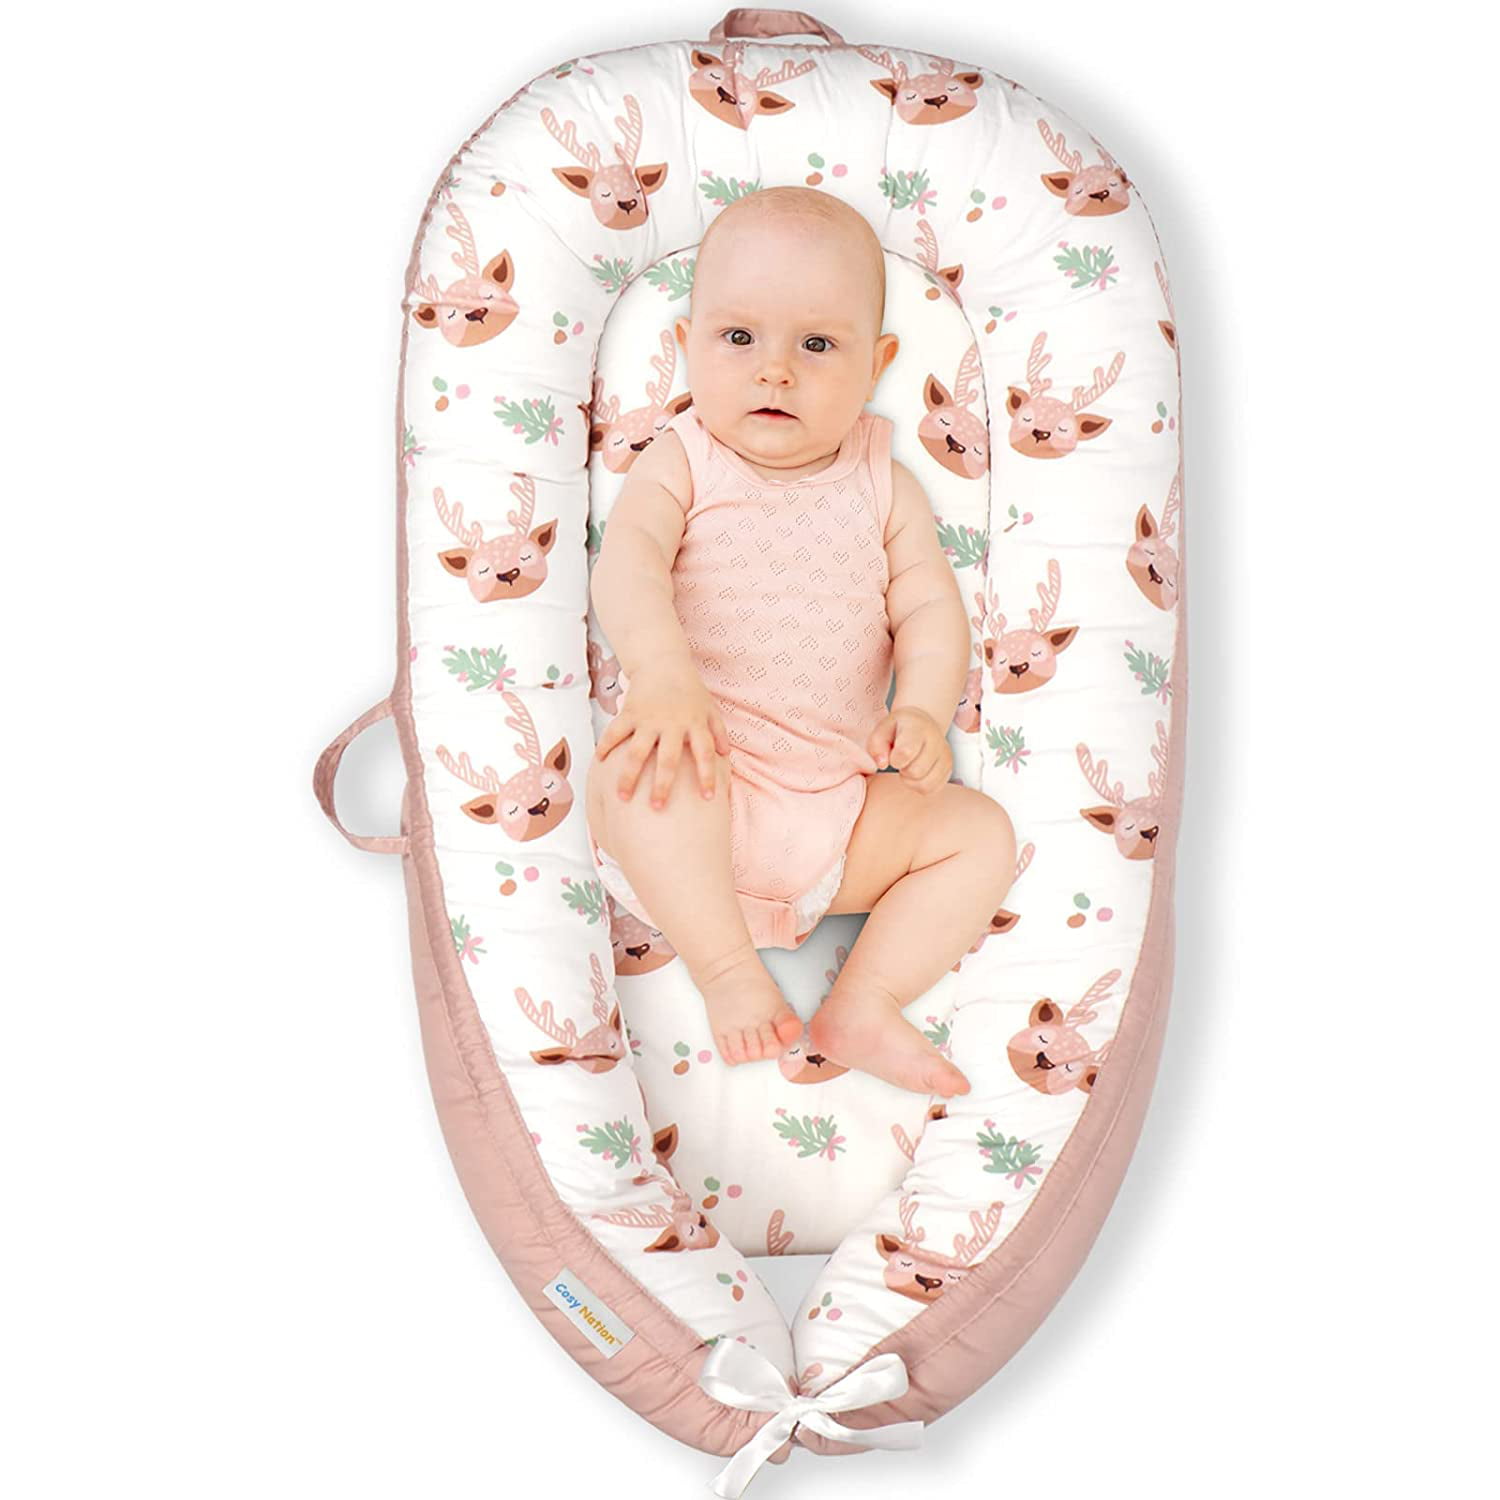 Baby Lounger Leaves Portable Super Soft Organic Cotton and Breathable Newborn Lounger Perfect for Co-Sleeping Baby Nest 